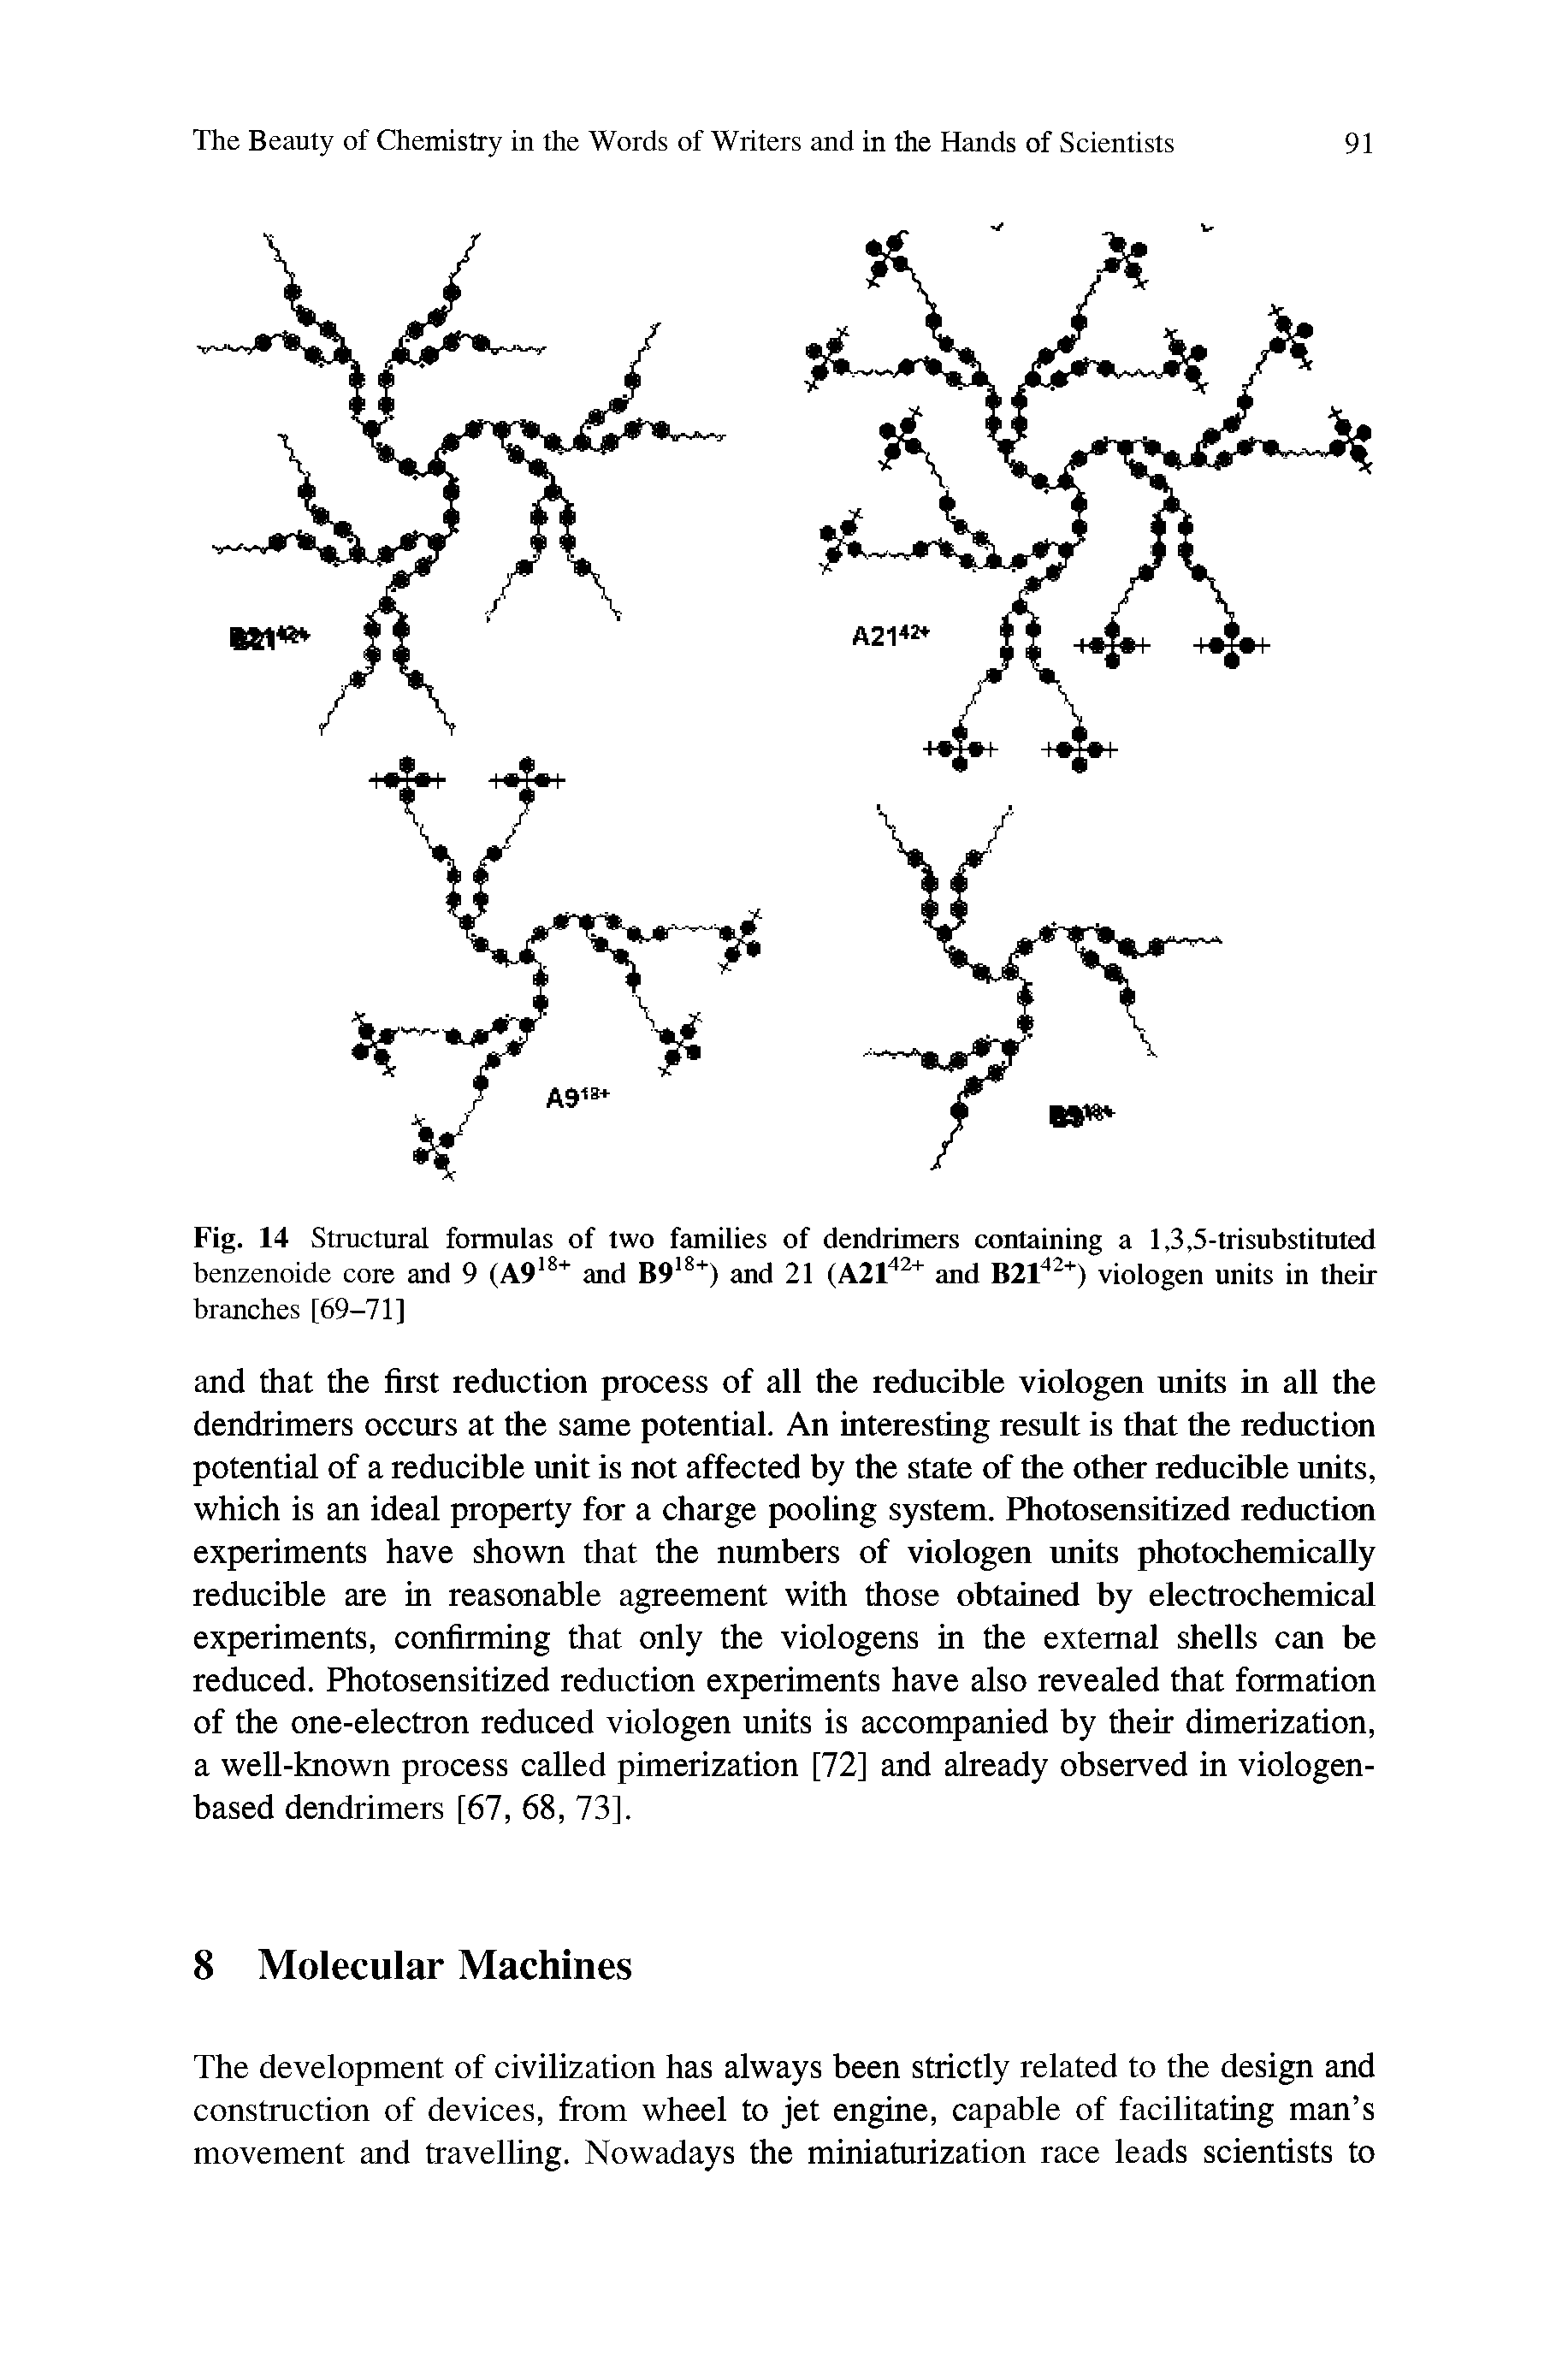 Fig. 14 Structural formulas of two families of dendrimers containing a 1,3,5-trisubstituted benzenoide core and 9 (A918+ and B918+) and 21 (A2142+ and B2142+) viologen units in their branches [69-71]...